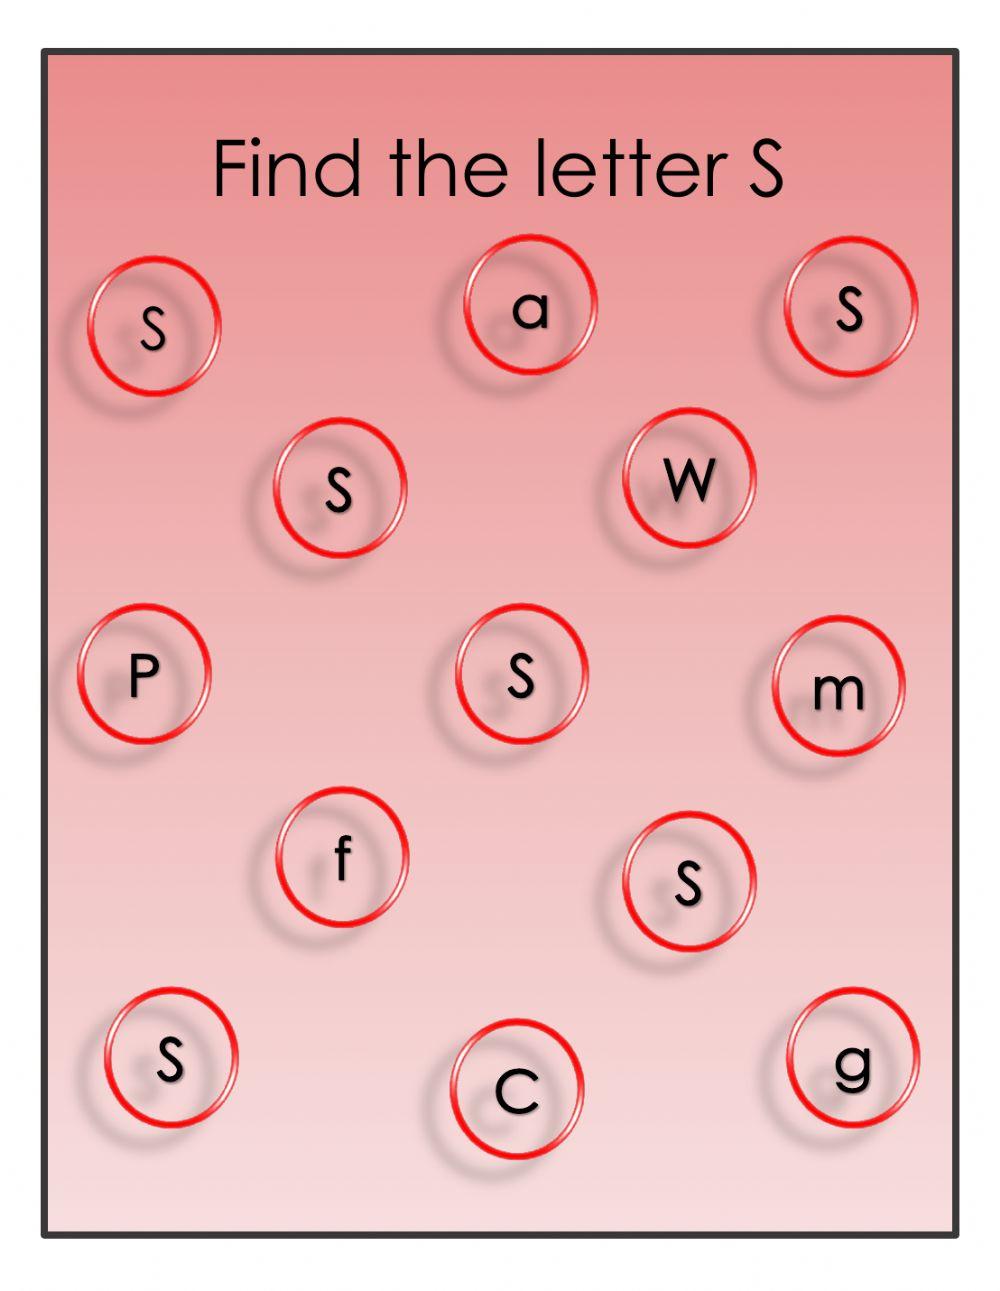 Identifying the letter s